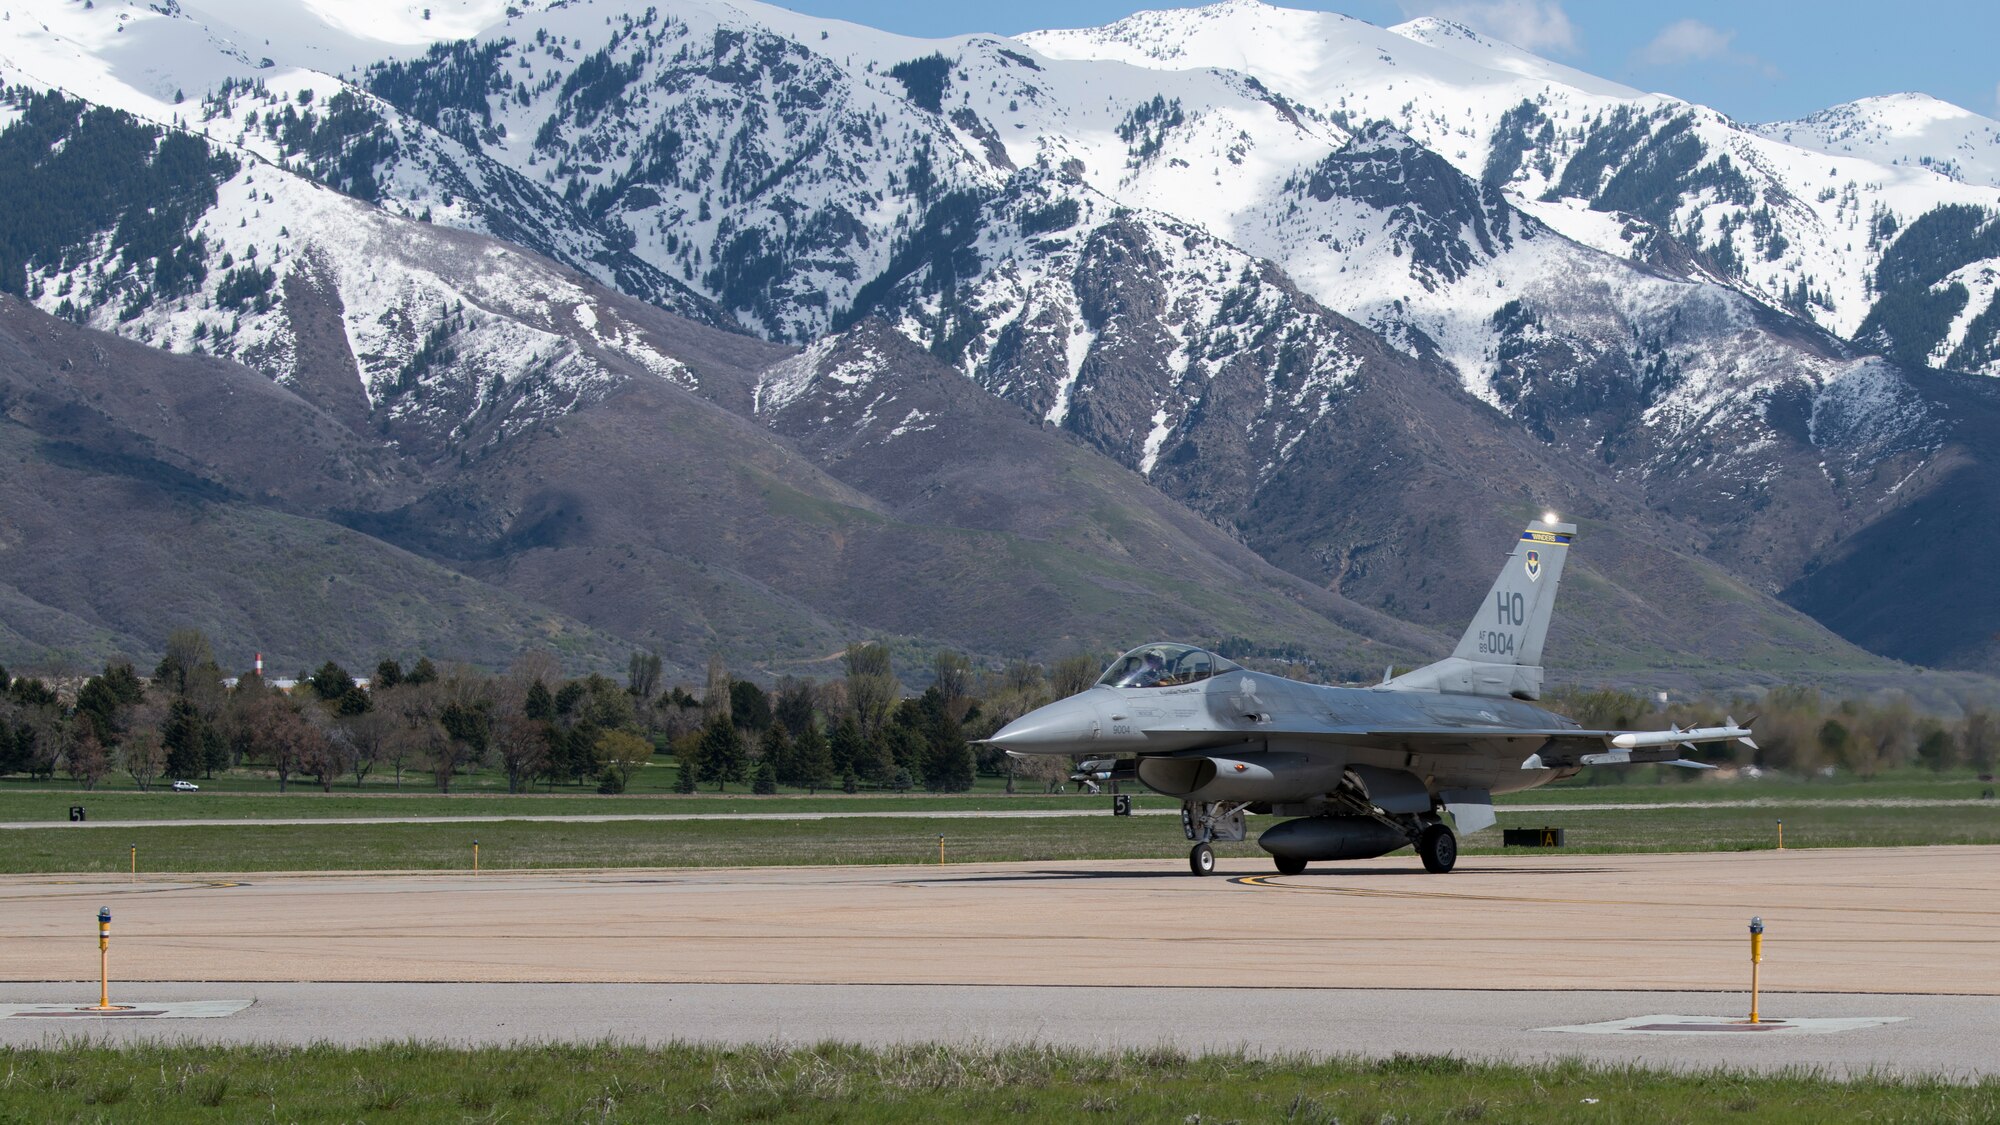 A 311th Fighter Squadron F-16 Viper taxis after landing, April 24, 2019, on Hill Air Force Base, Utah. Between April 22 and May 3, the 311th FS conducted 174 sorties in support of student pilot training and dissimilar air combat training with the F-35 Lightning II. (U.S. Air Force photo by Staff Sgt. BreeAnn Sachs)